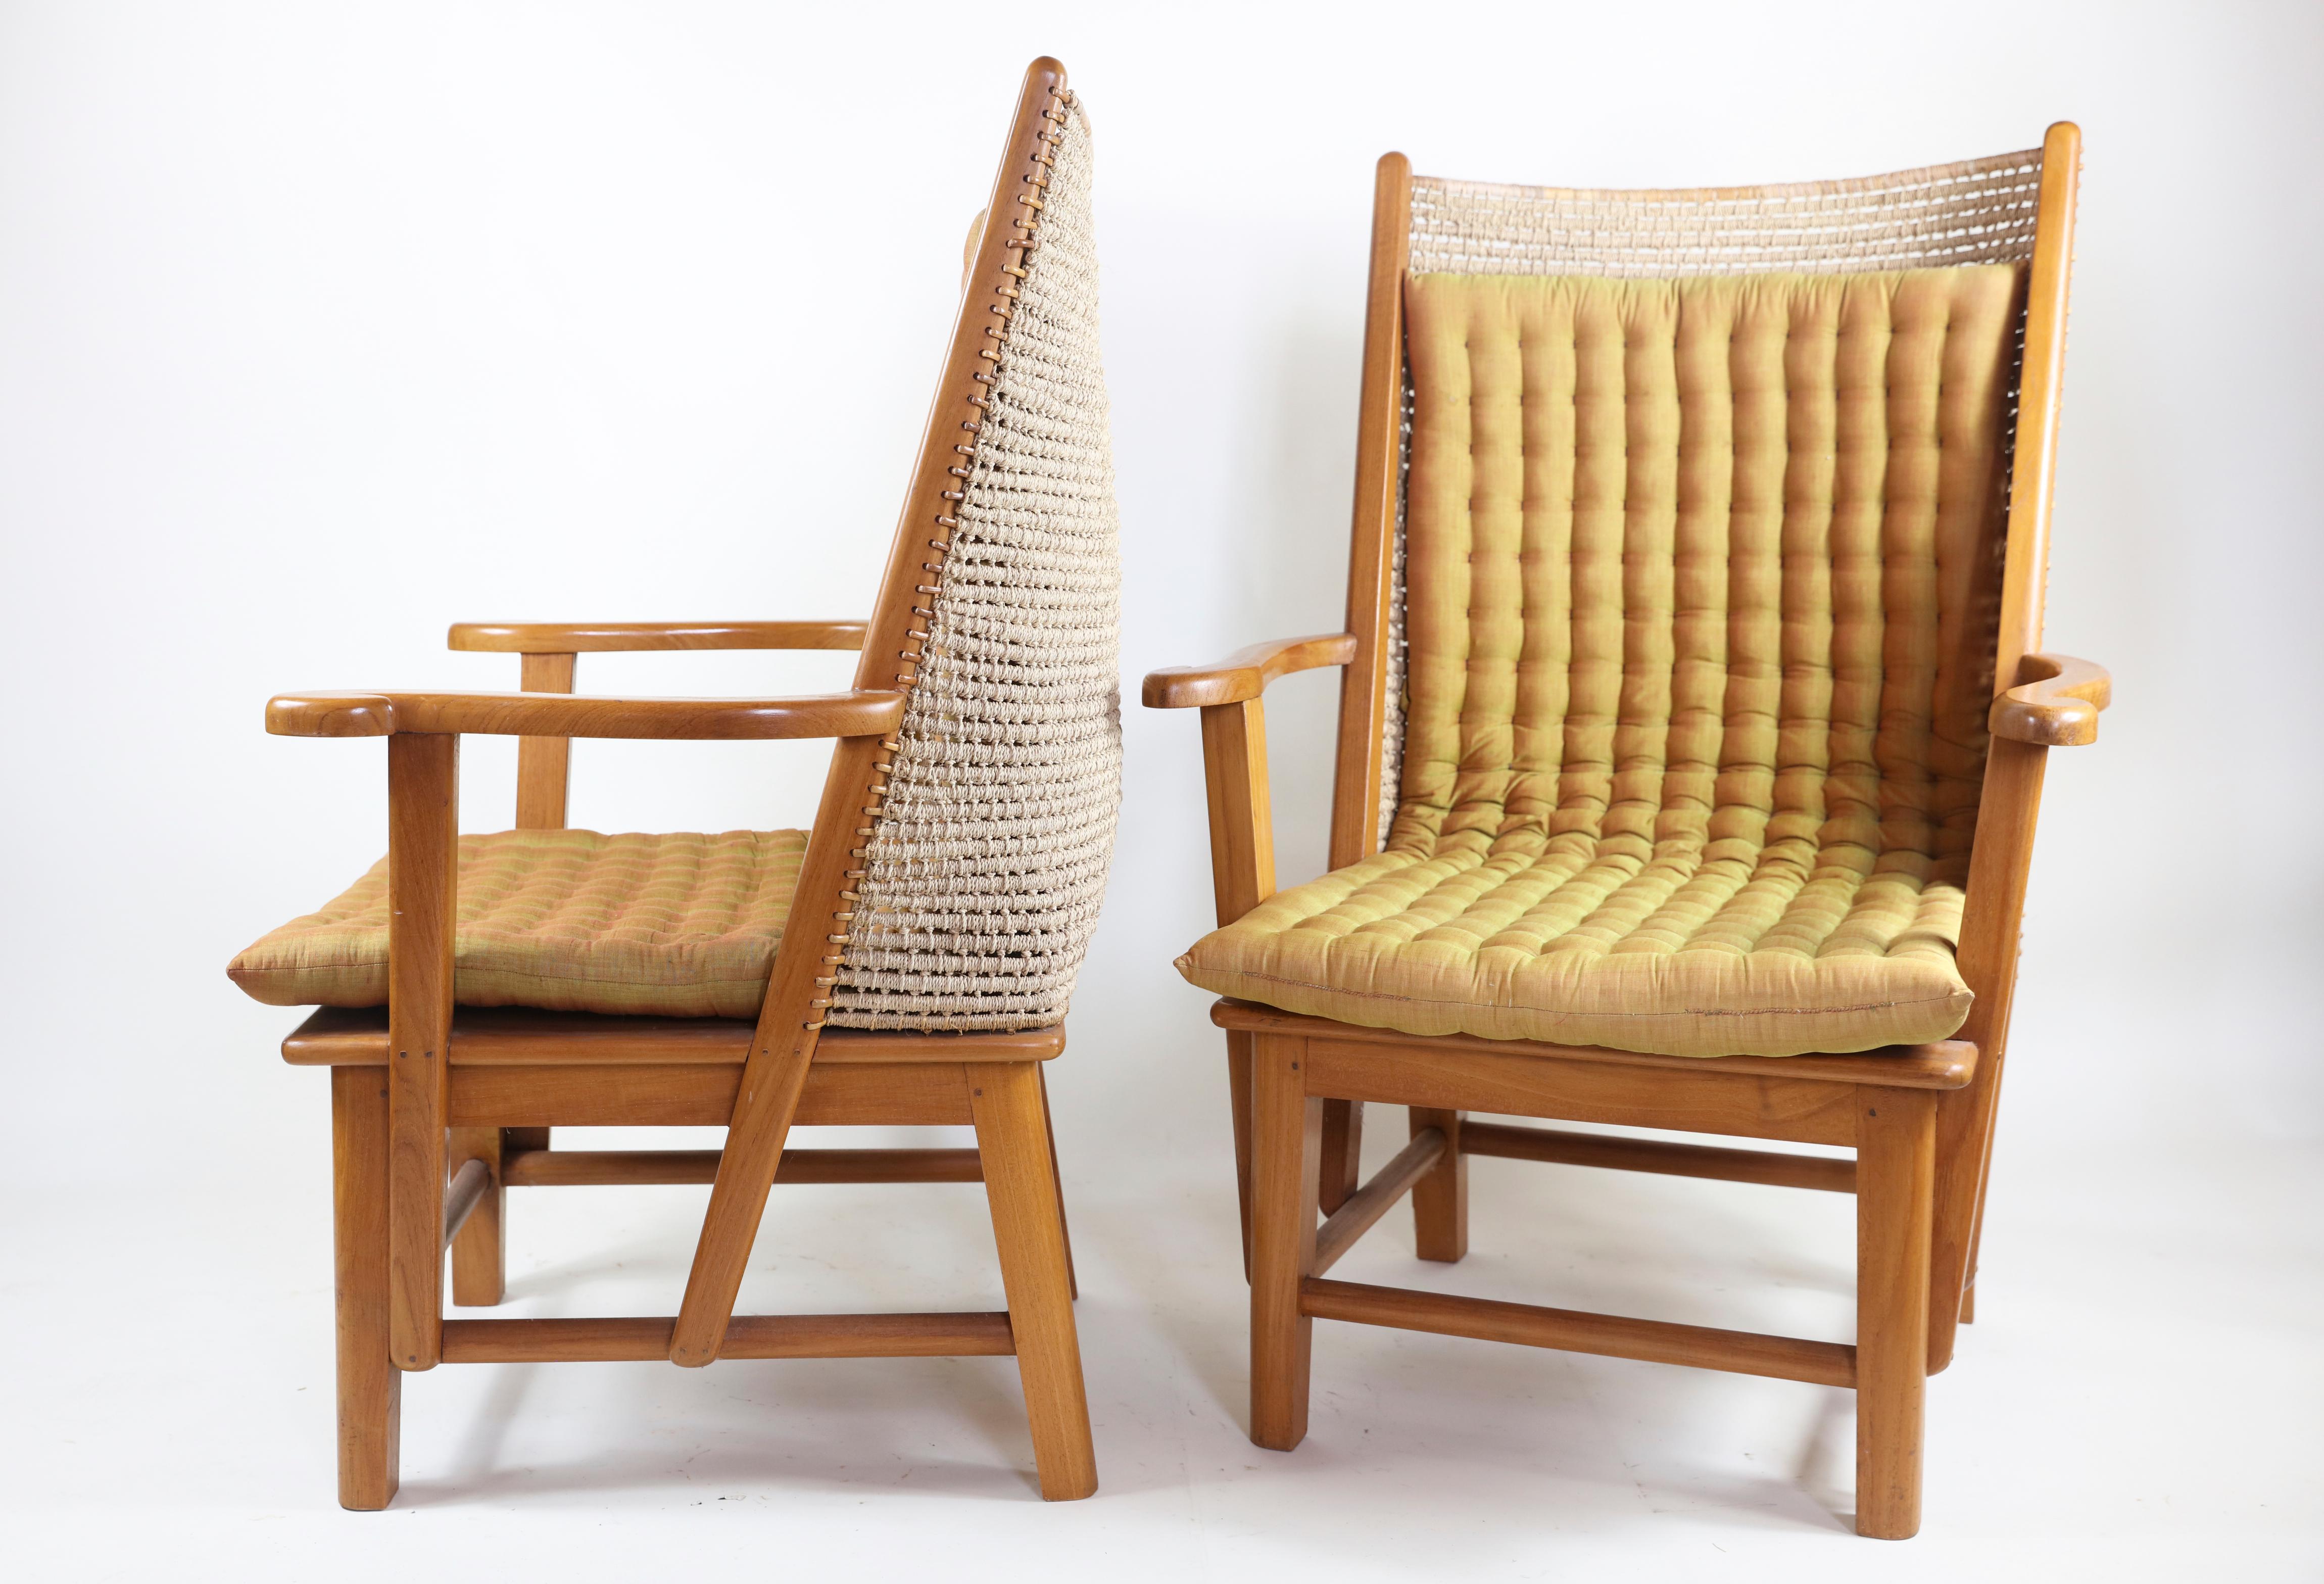 Pair of woven jute high back chairs with cushions

11875-2.